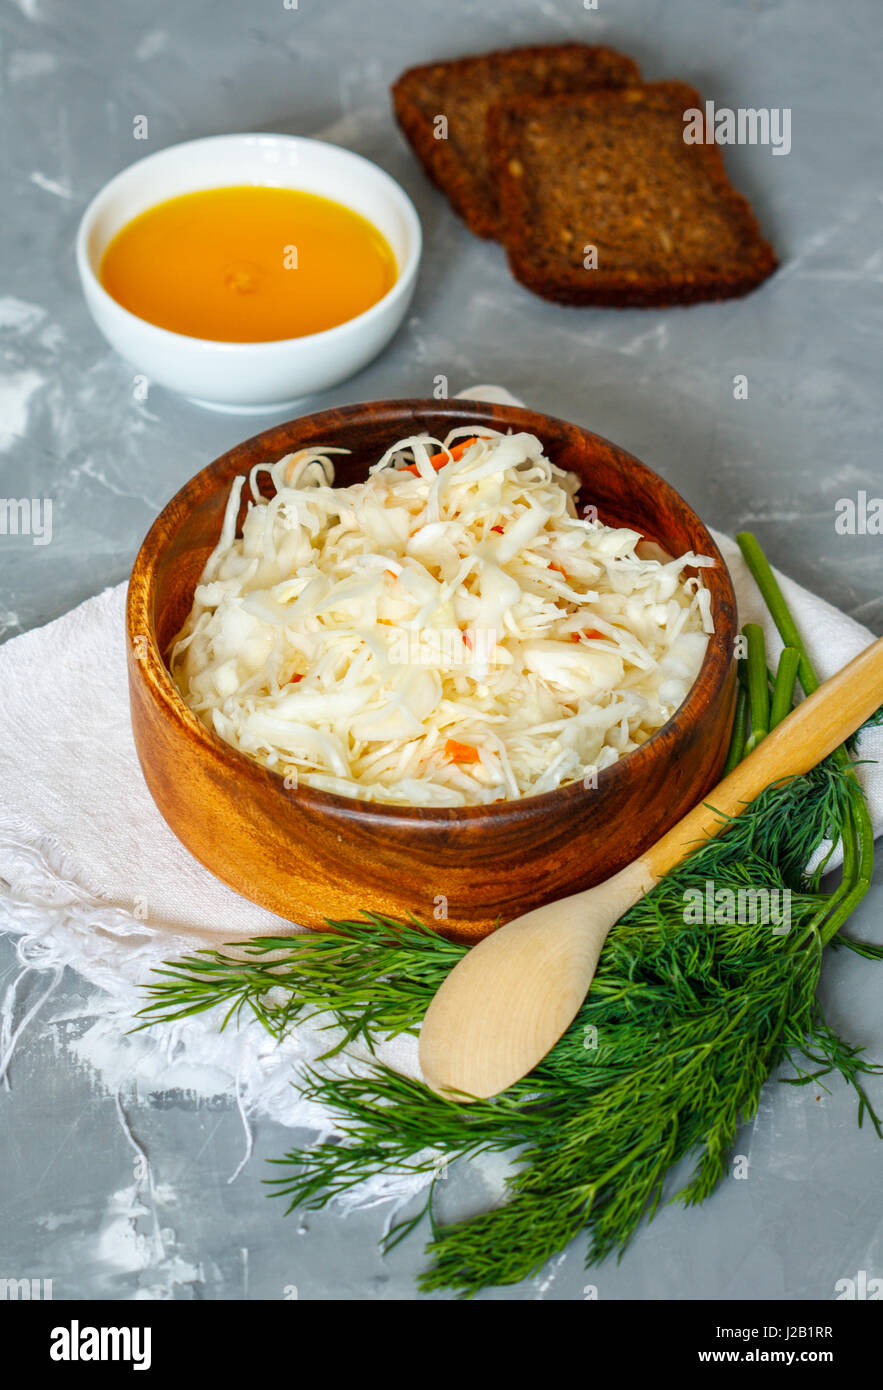 Sauerkraut in wooden bowl with bread, oil and dill. Love for a healthy vegan food concept Stock Photo